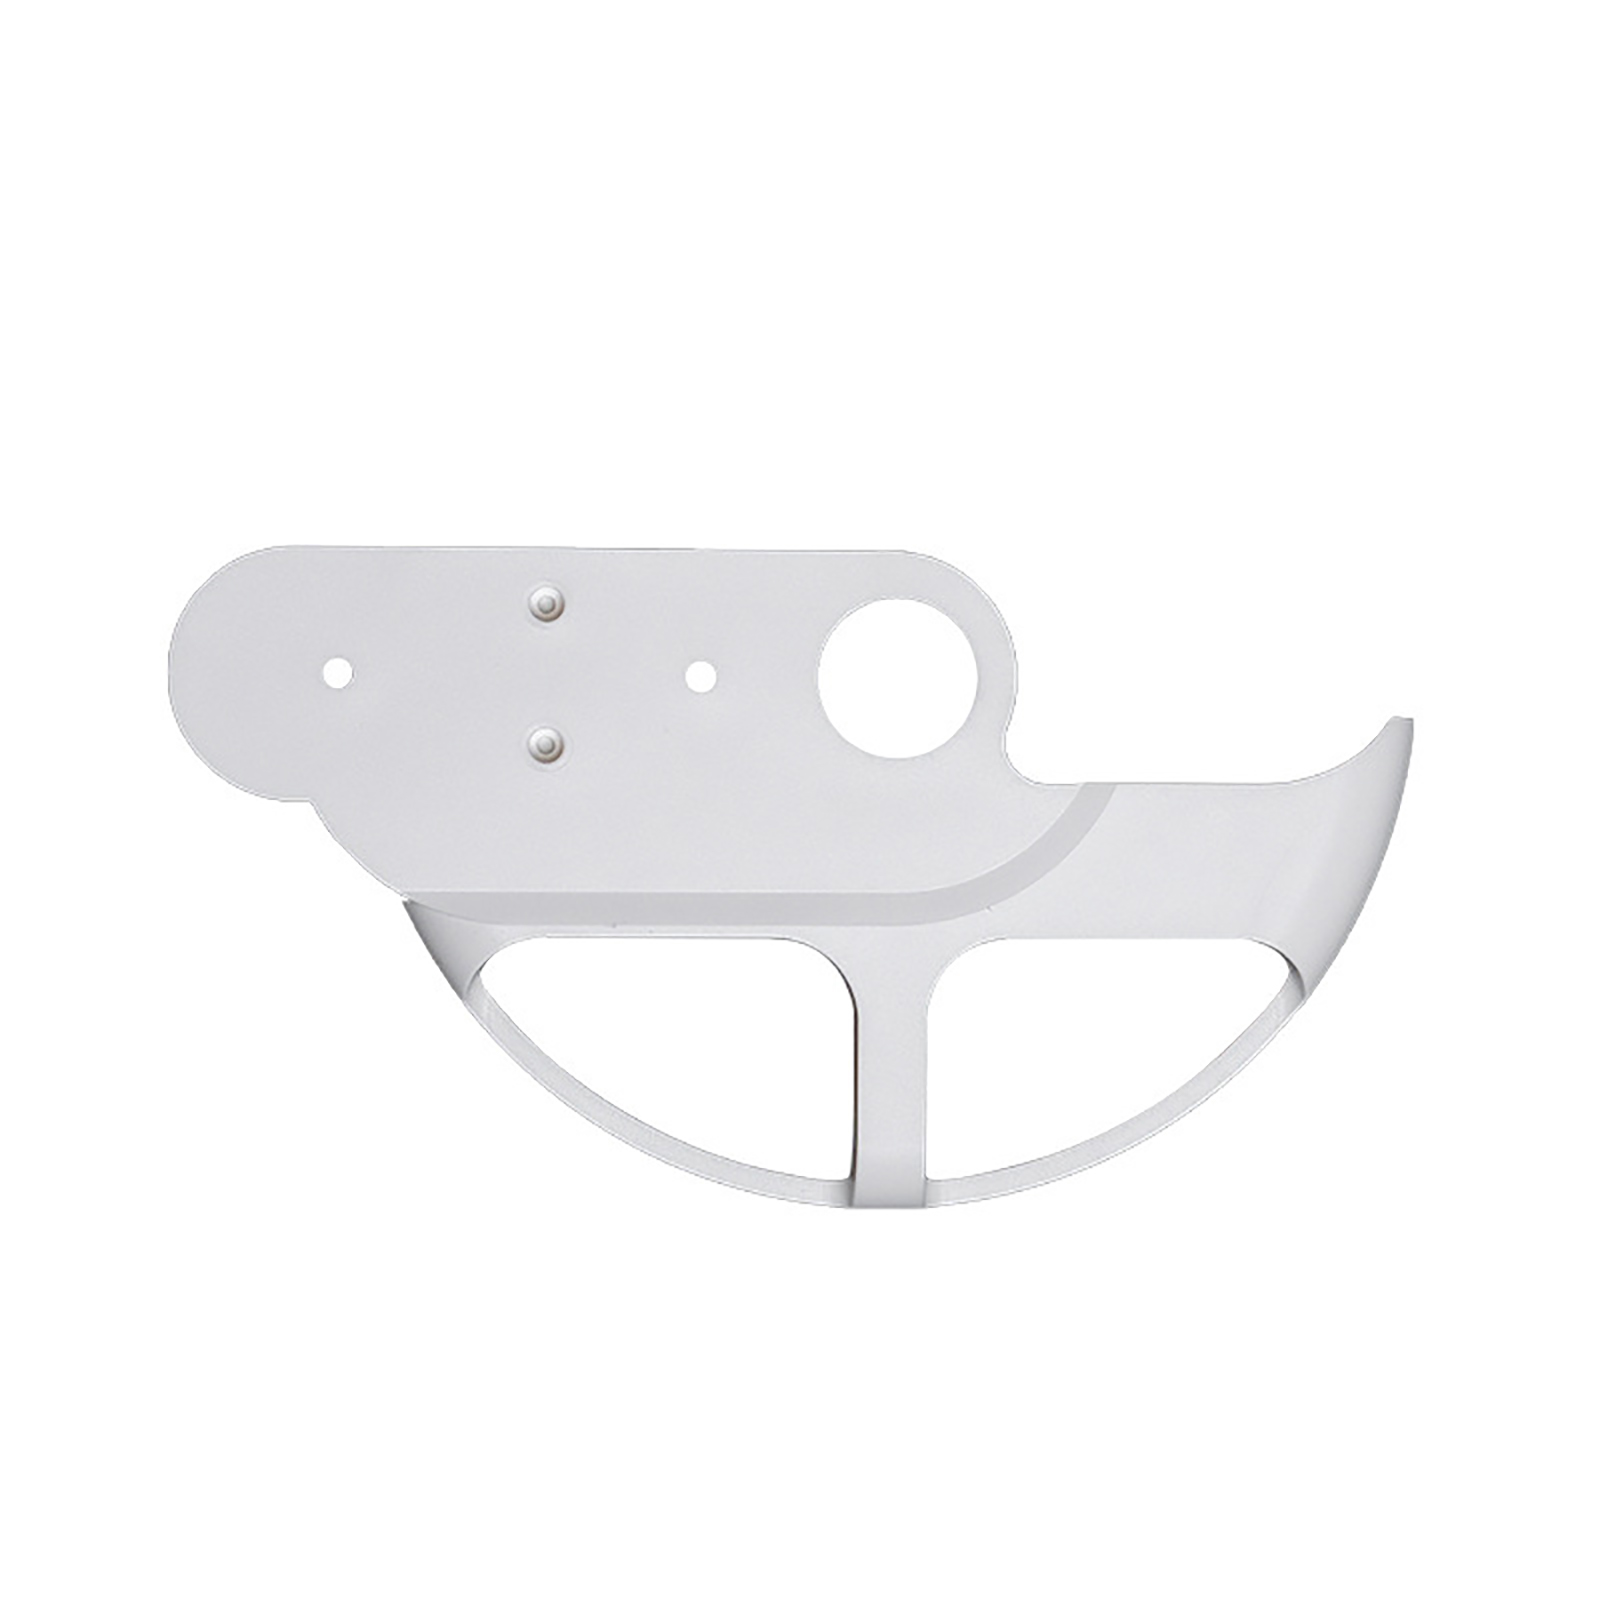 Universal For XIAOMI M365//Pro Scooter Brake Disc Protector Anti-Scratch